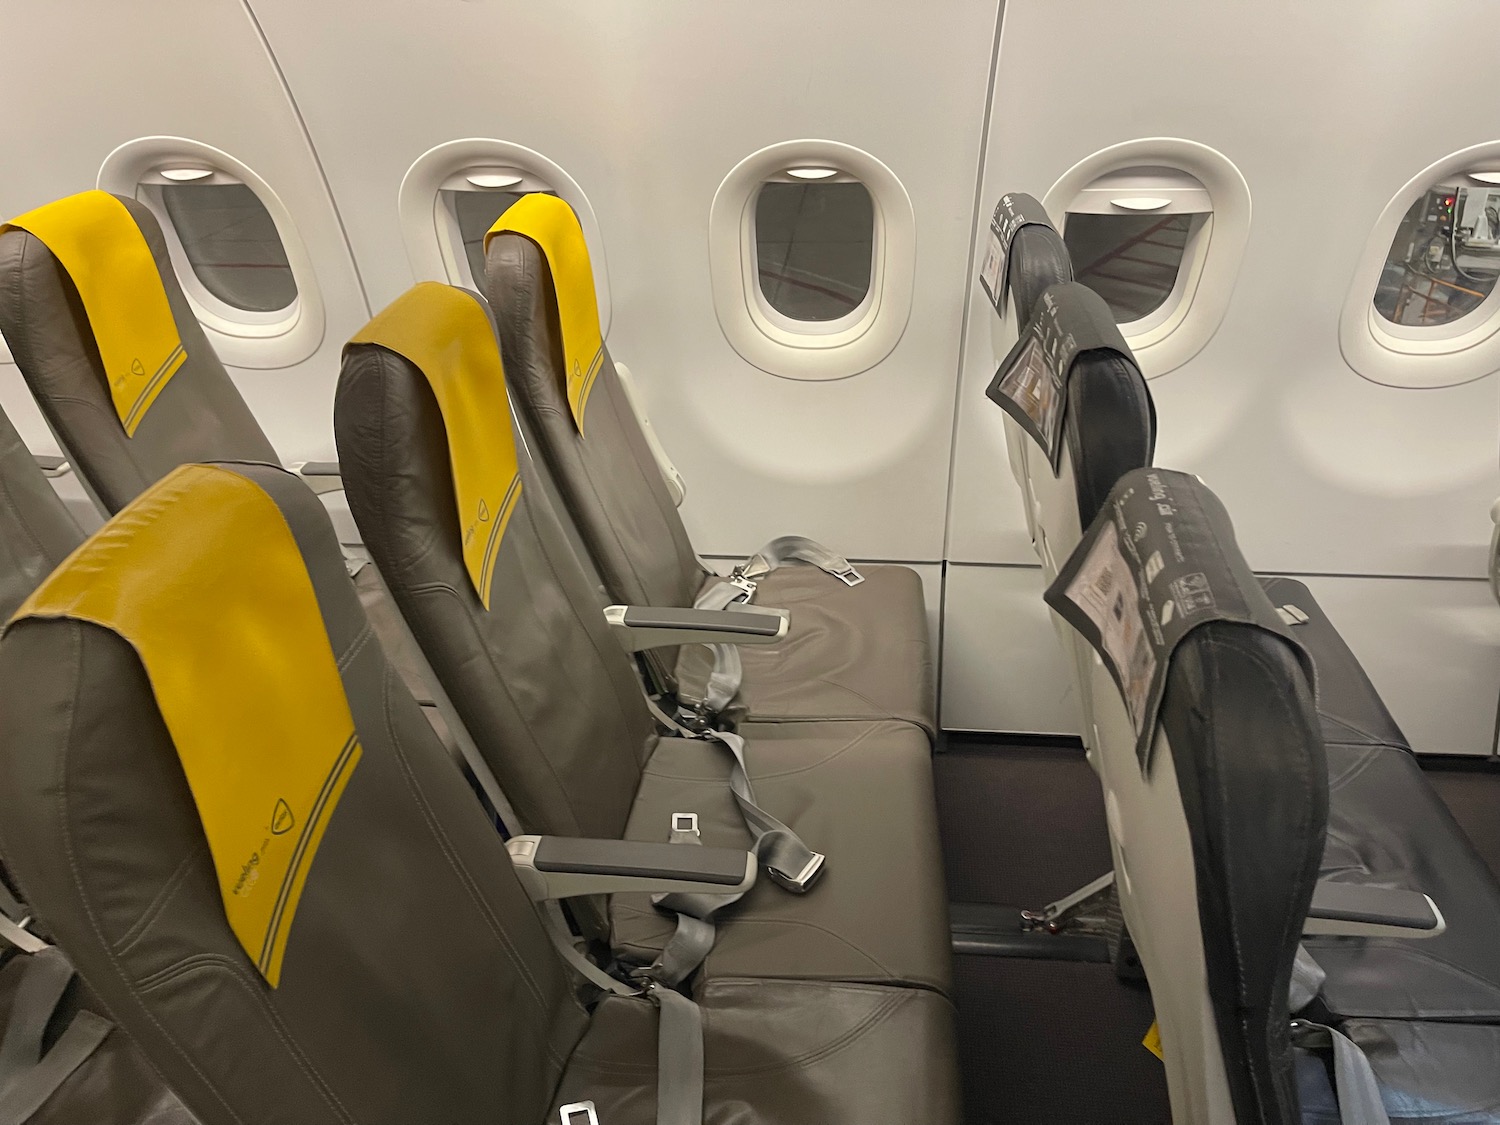 seats in an airplane with seats in the back